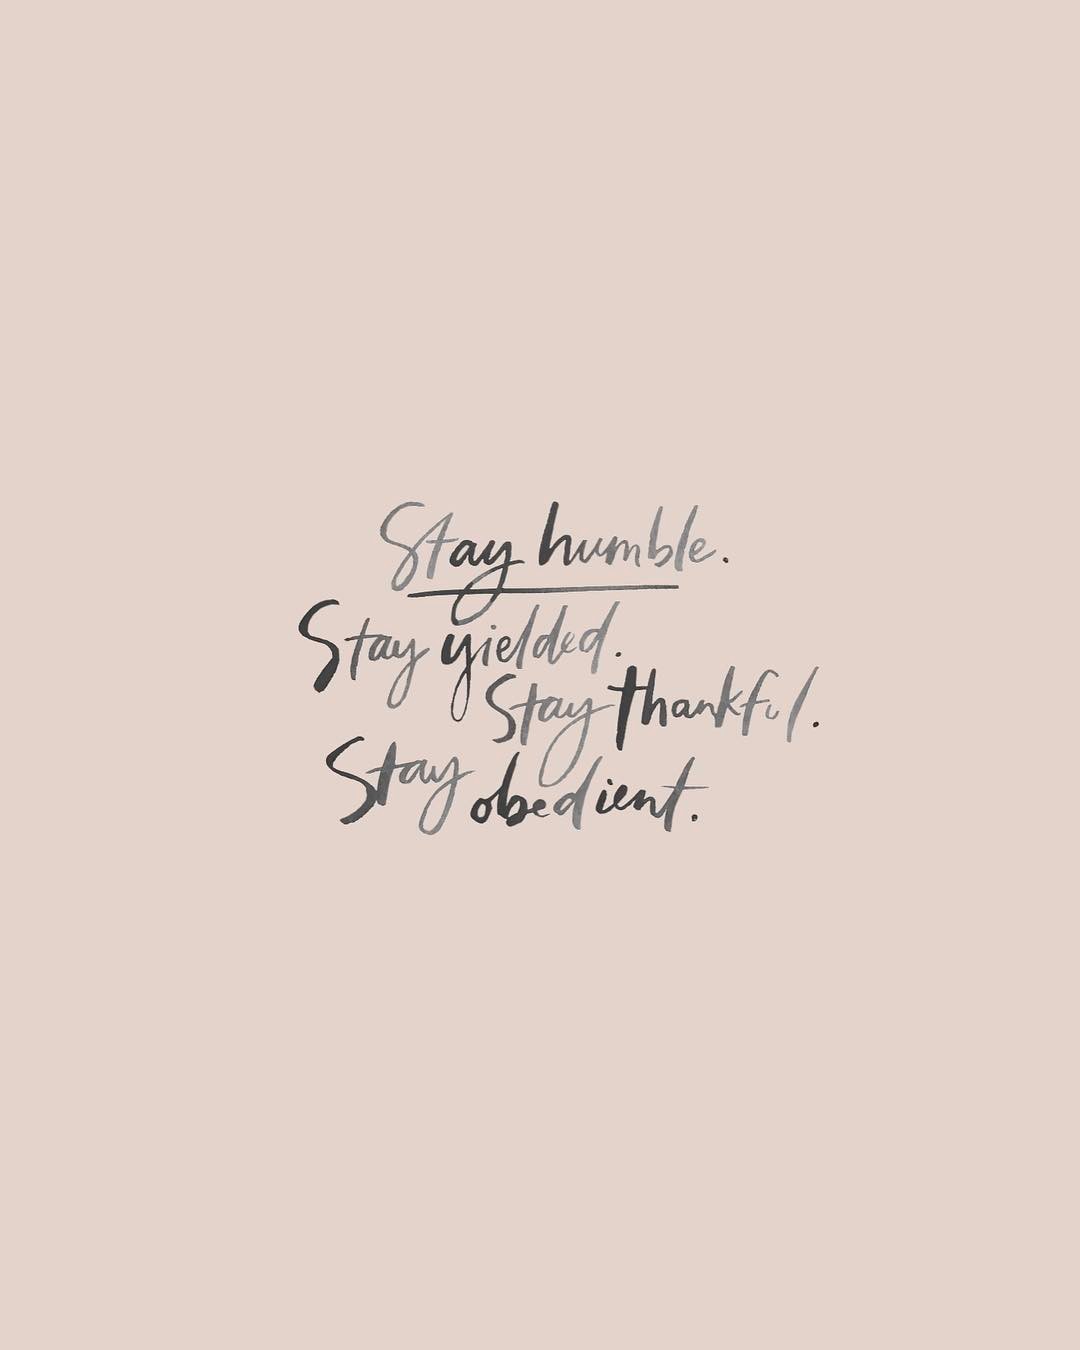 𝓜𝓮𝓰𝓼 𝐨𝐥𝐝𝐟𝐚𝐫𝐦𝐡𝐨𝐮𝐬e — stay humble, stay yielded, stay thankful, stay...